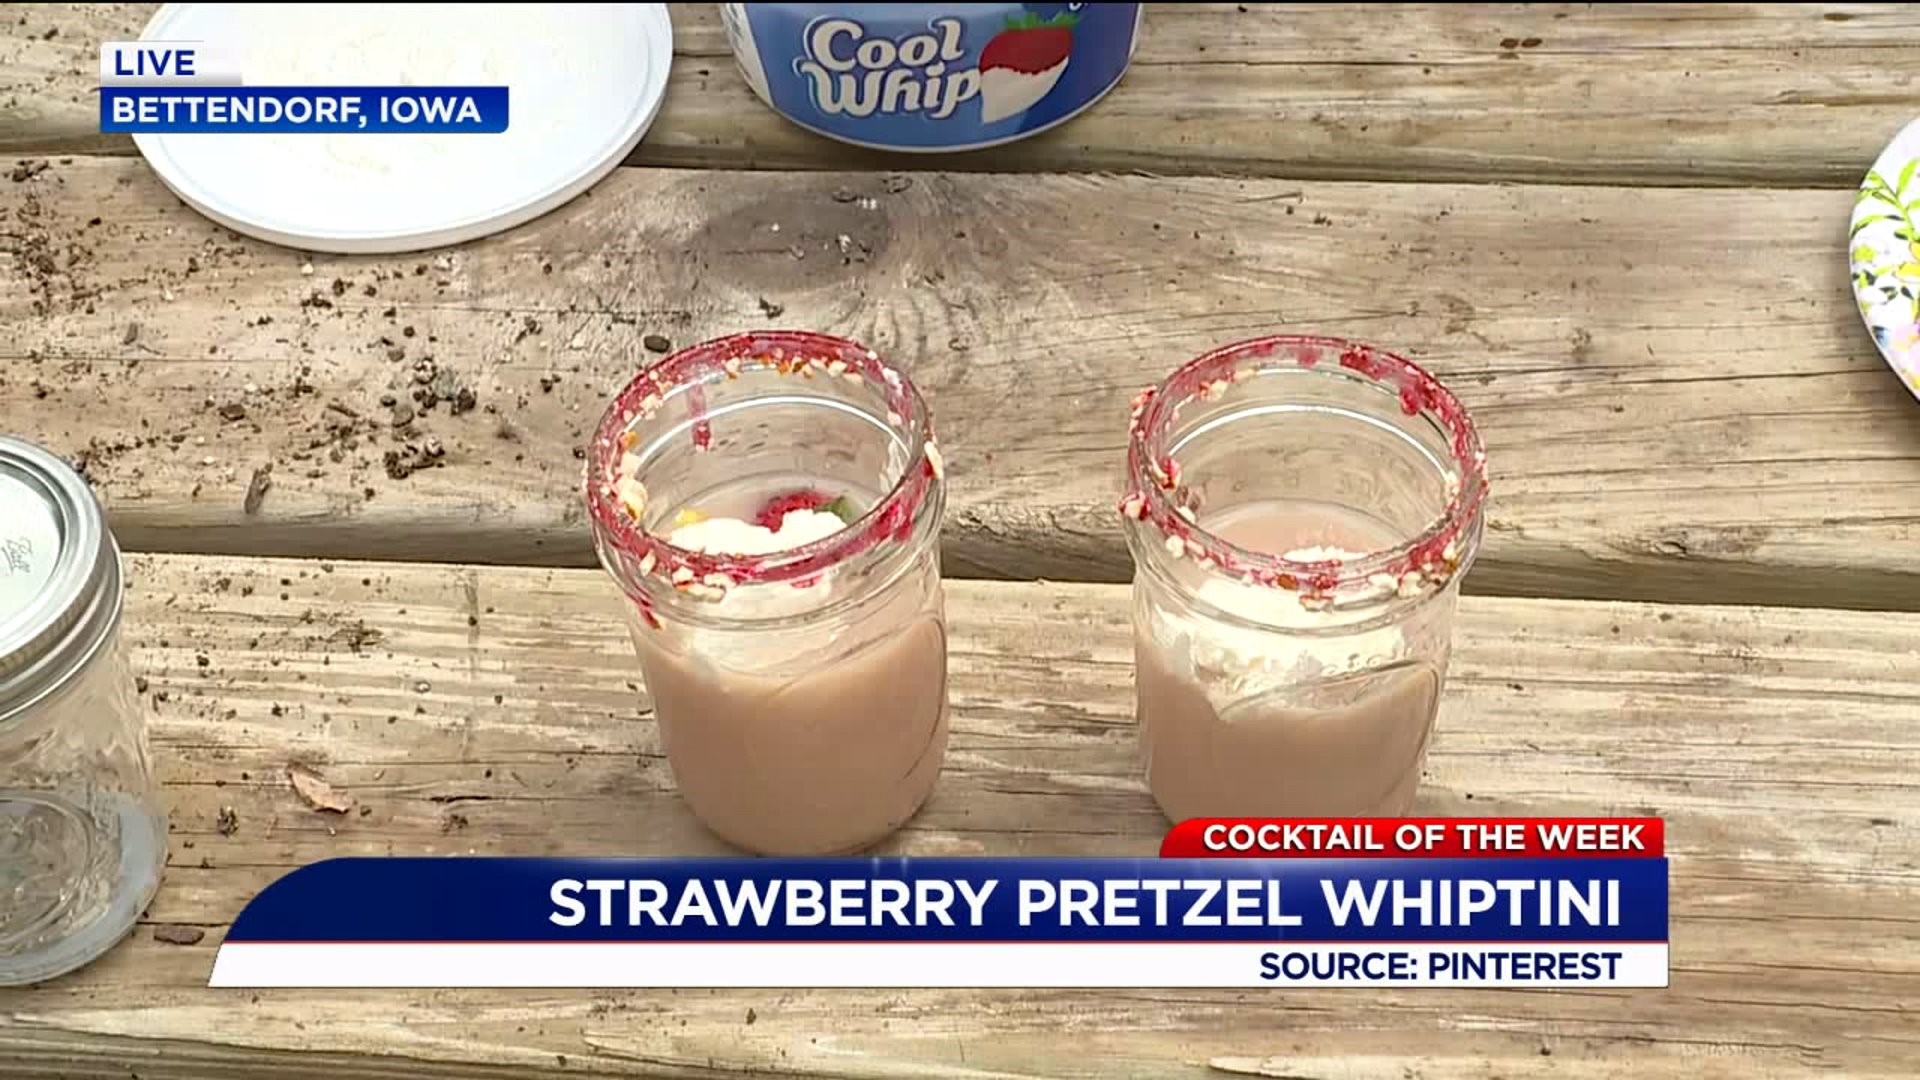 COCKTAIL OF THE WEEK: Strawberry Pretzel Whiptinis